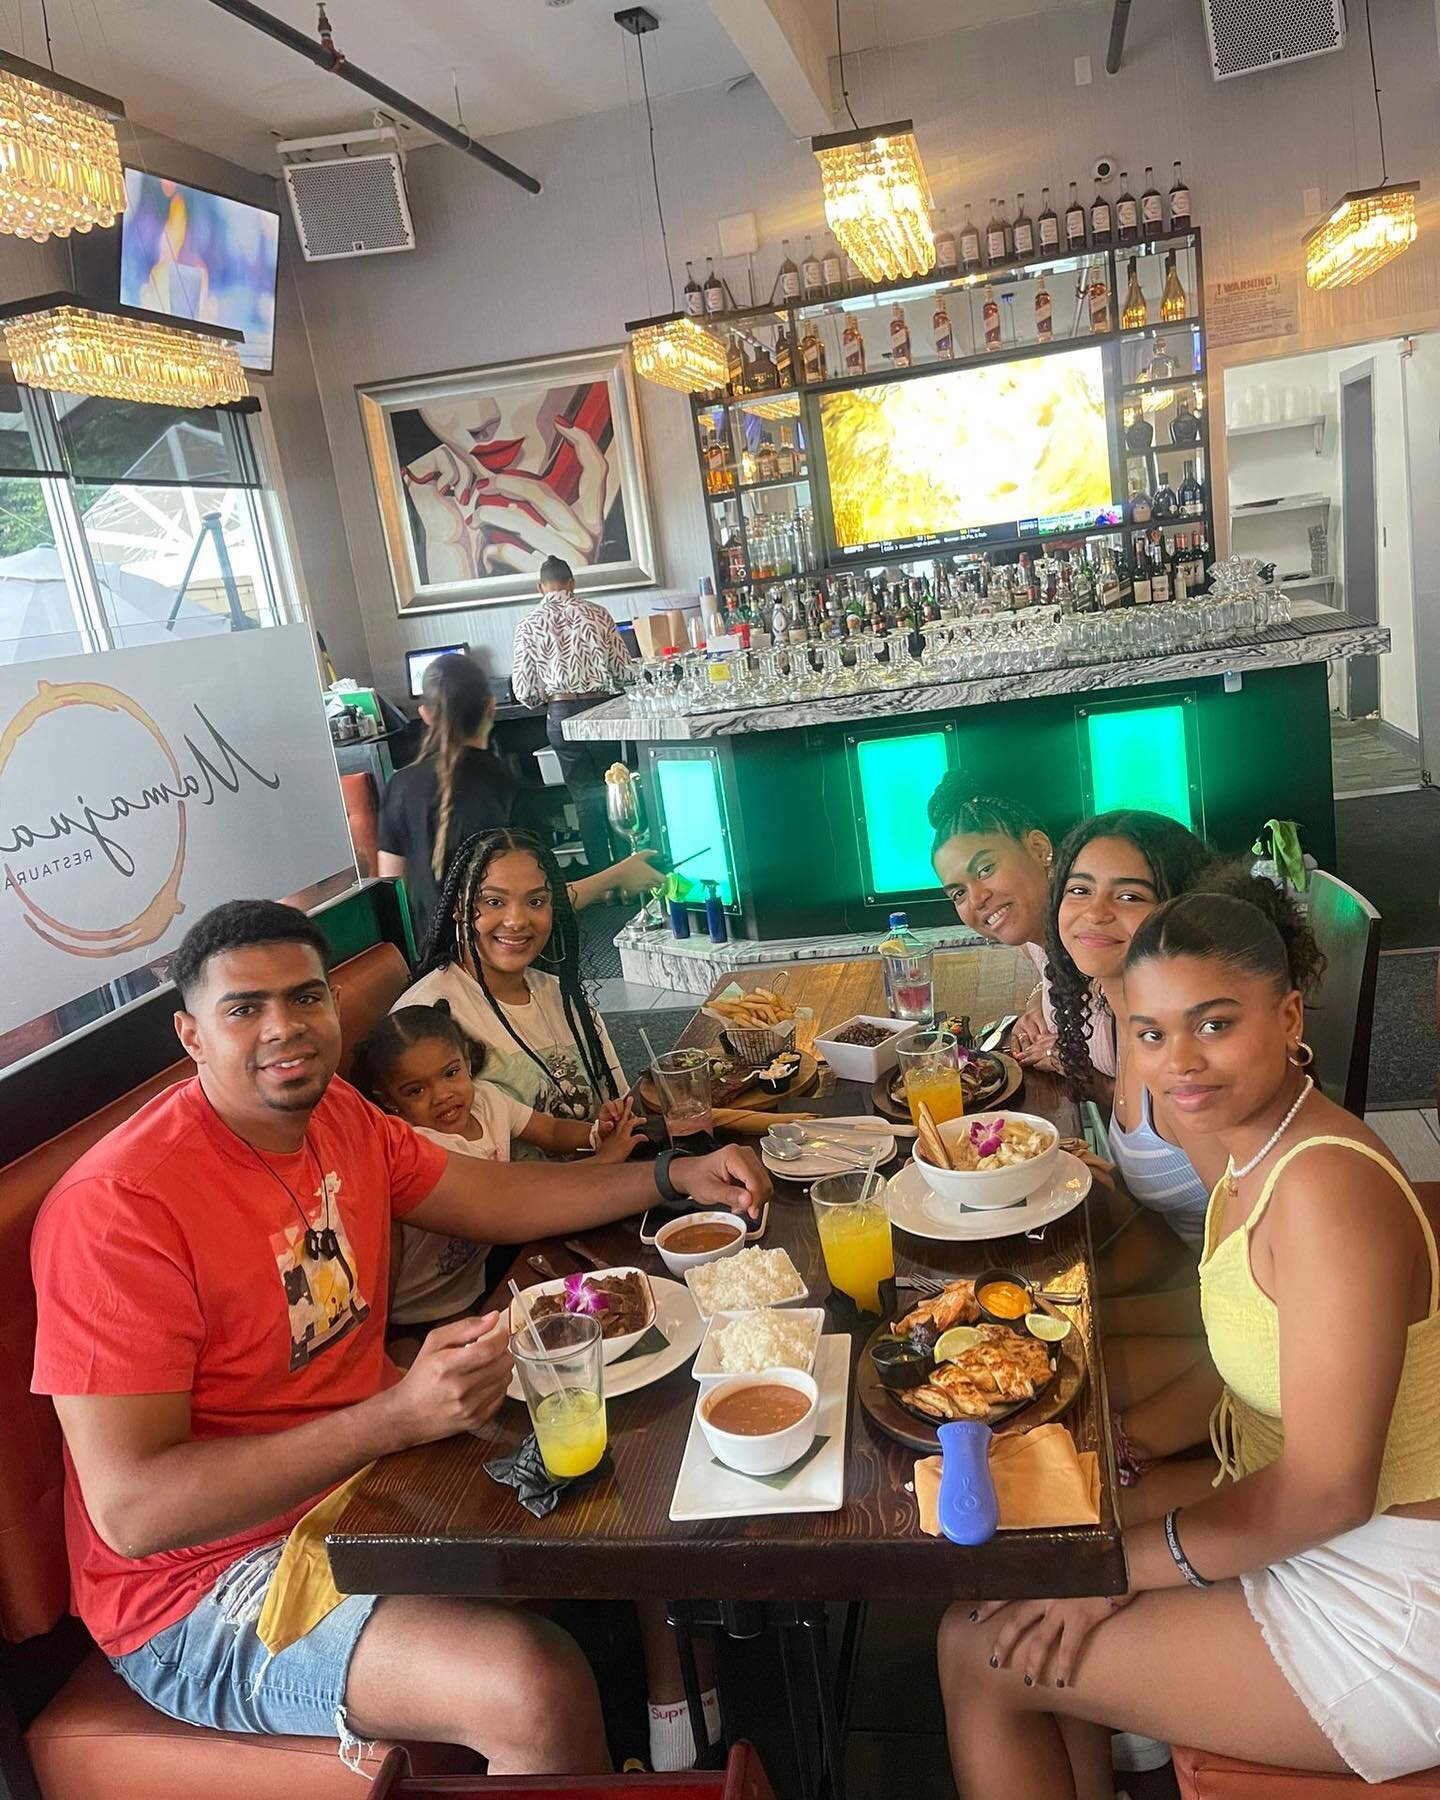 We are so grateful to have customers who love spending time in our restaurant.🙏🤩👨&zwj;👩&zwj;👧&zwj;👦

#family #time #enjoy #restaurants #mamajuana #mamajuanarestaurant #mamajuanarestaurantlounge #mamajuanalawrence